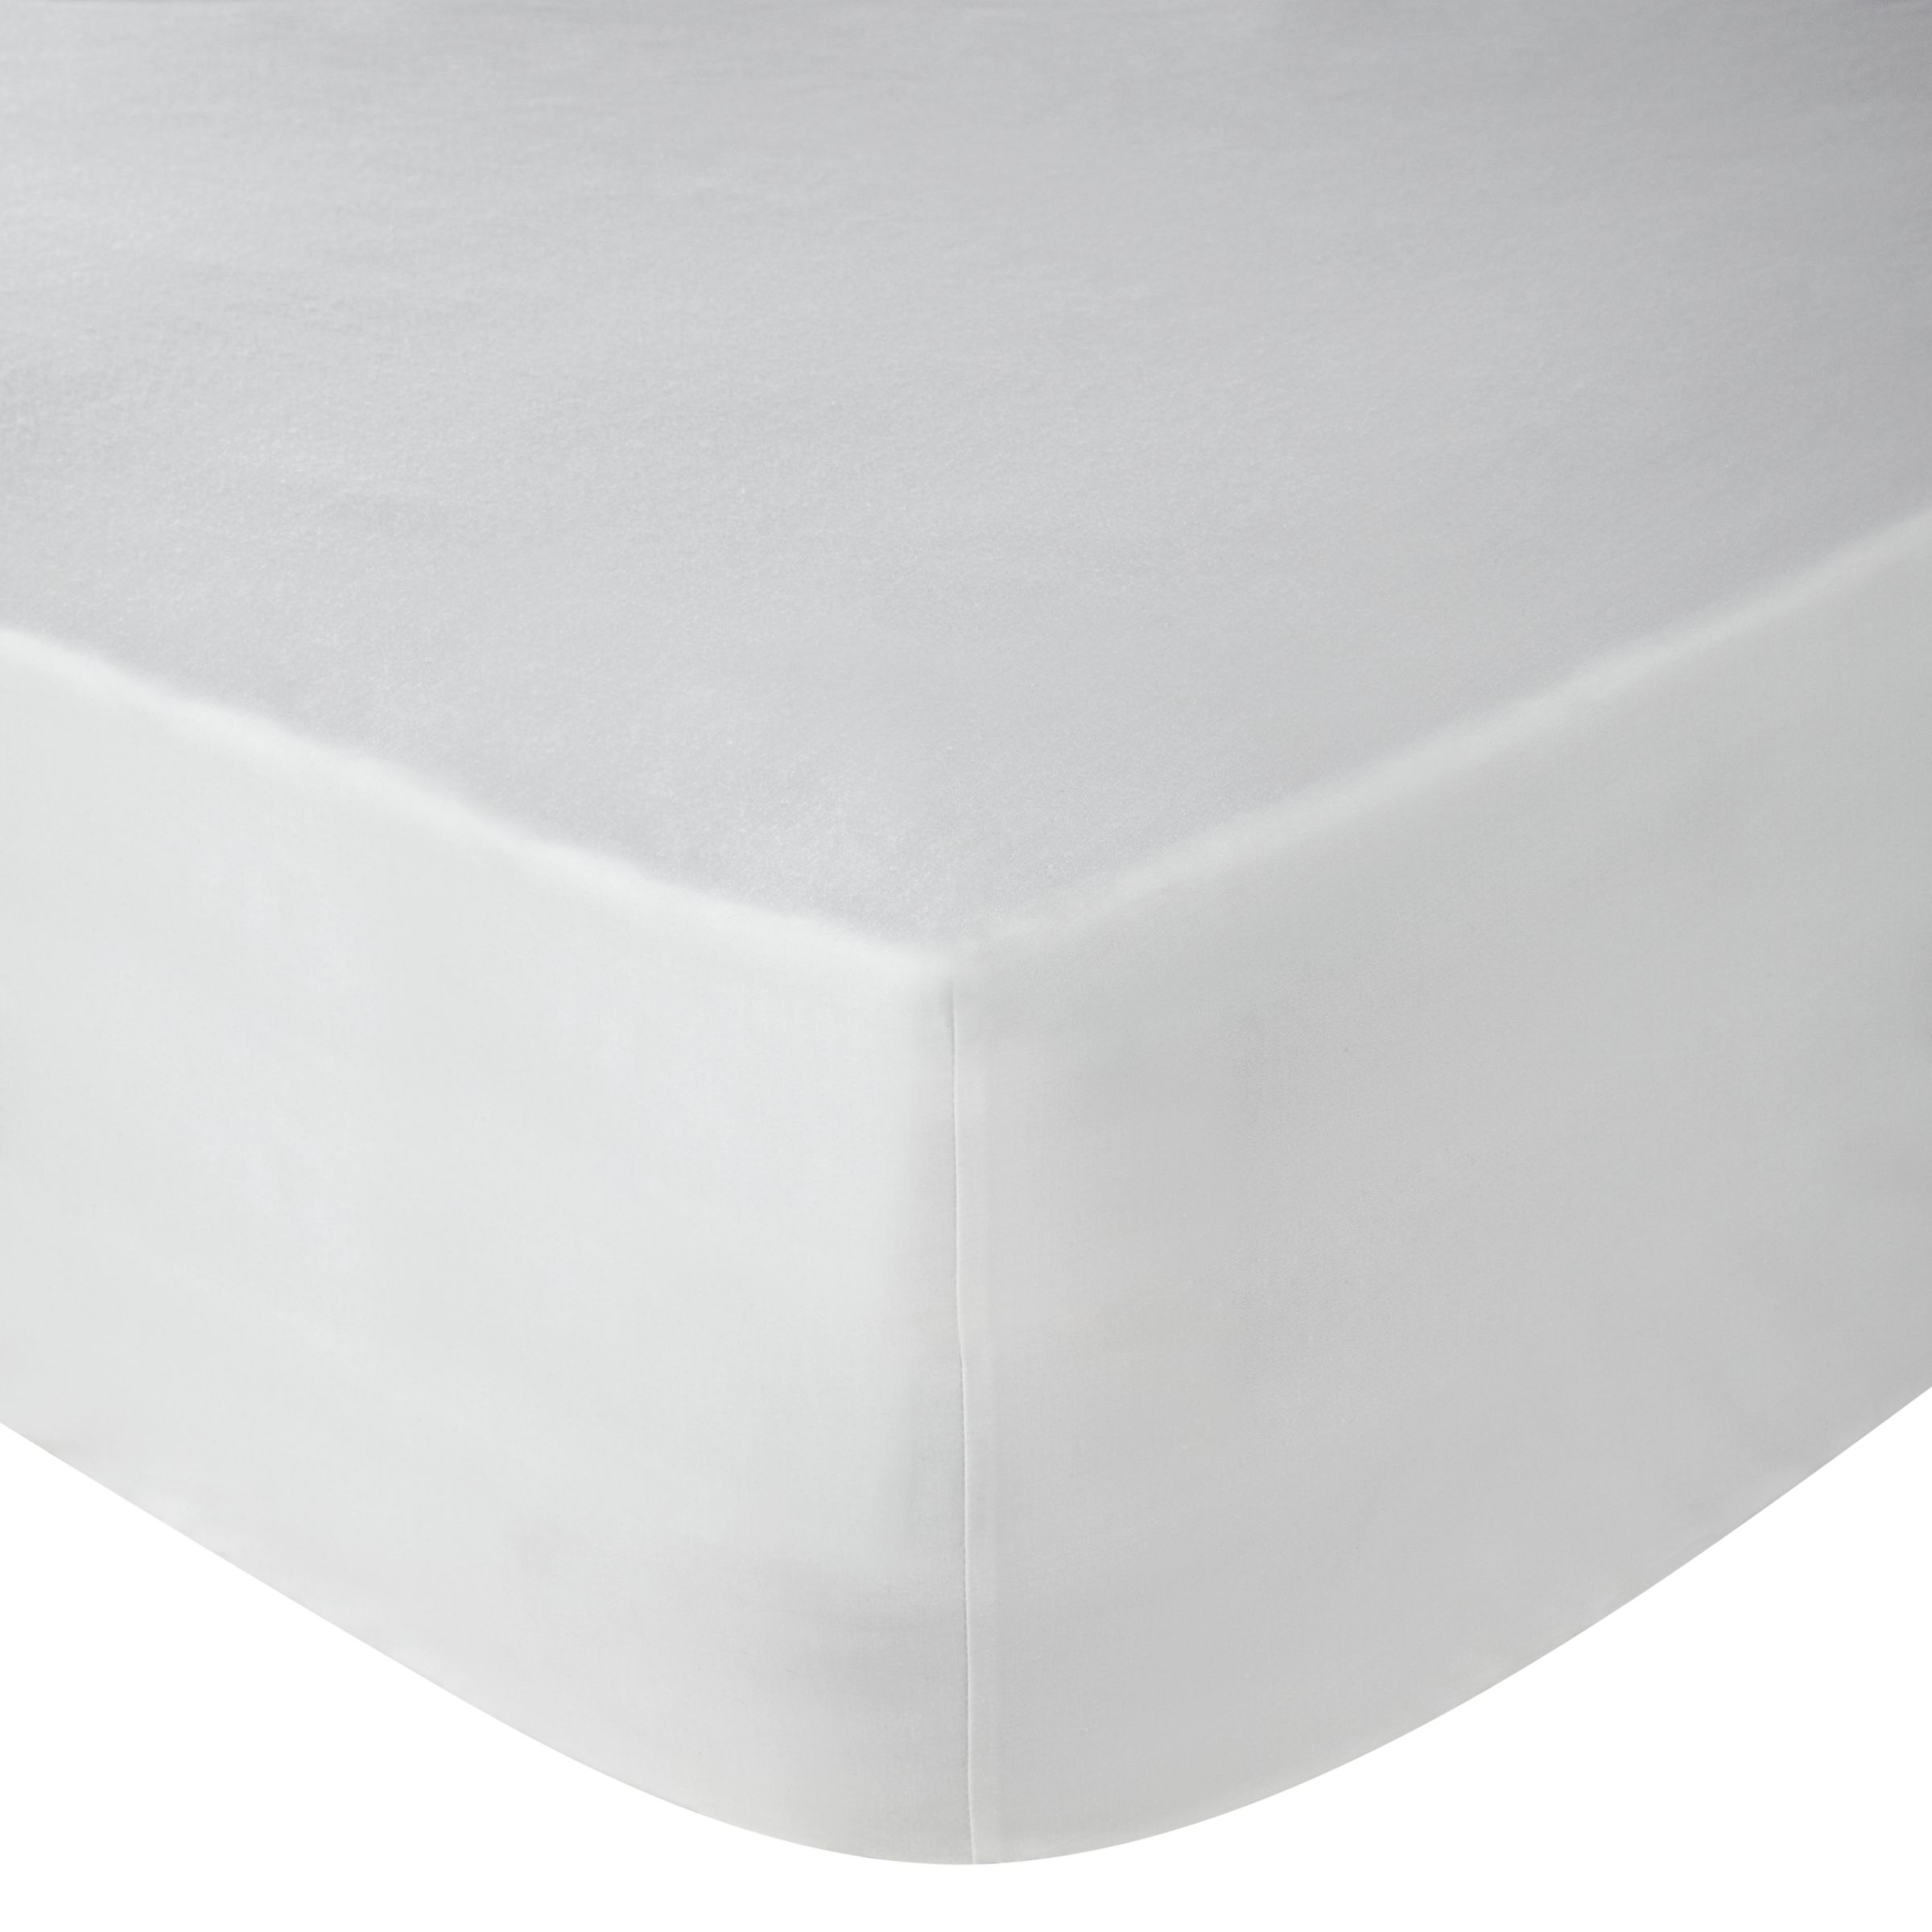 John Lewis Crisp & Fresh 200 Thread Count Egyptian Cotton Fitted Sheet, White, Double